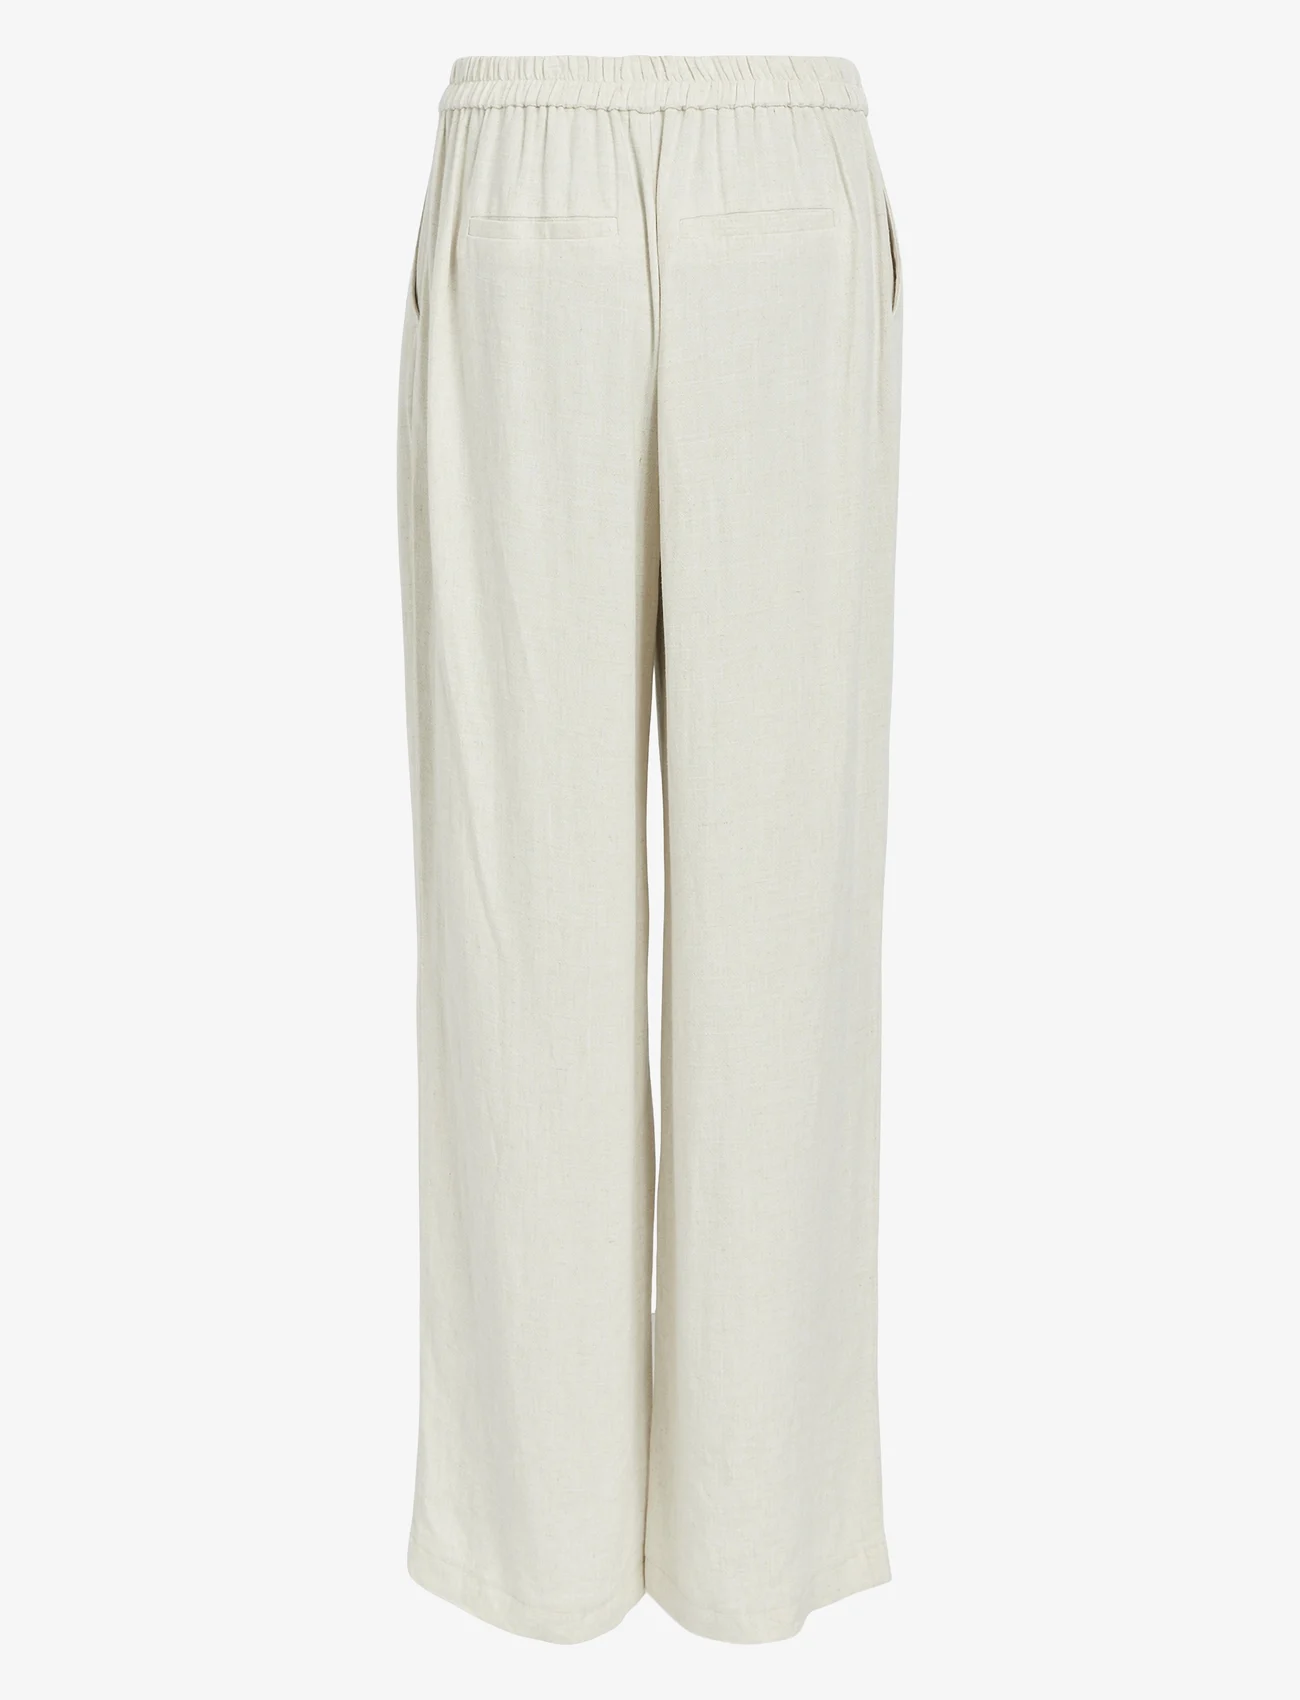 Object - OBJSANNE ALINE WIDE PANT NOOS - party wear at outlet prices - sandshell - 1